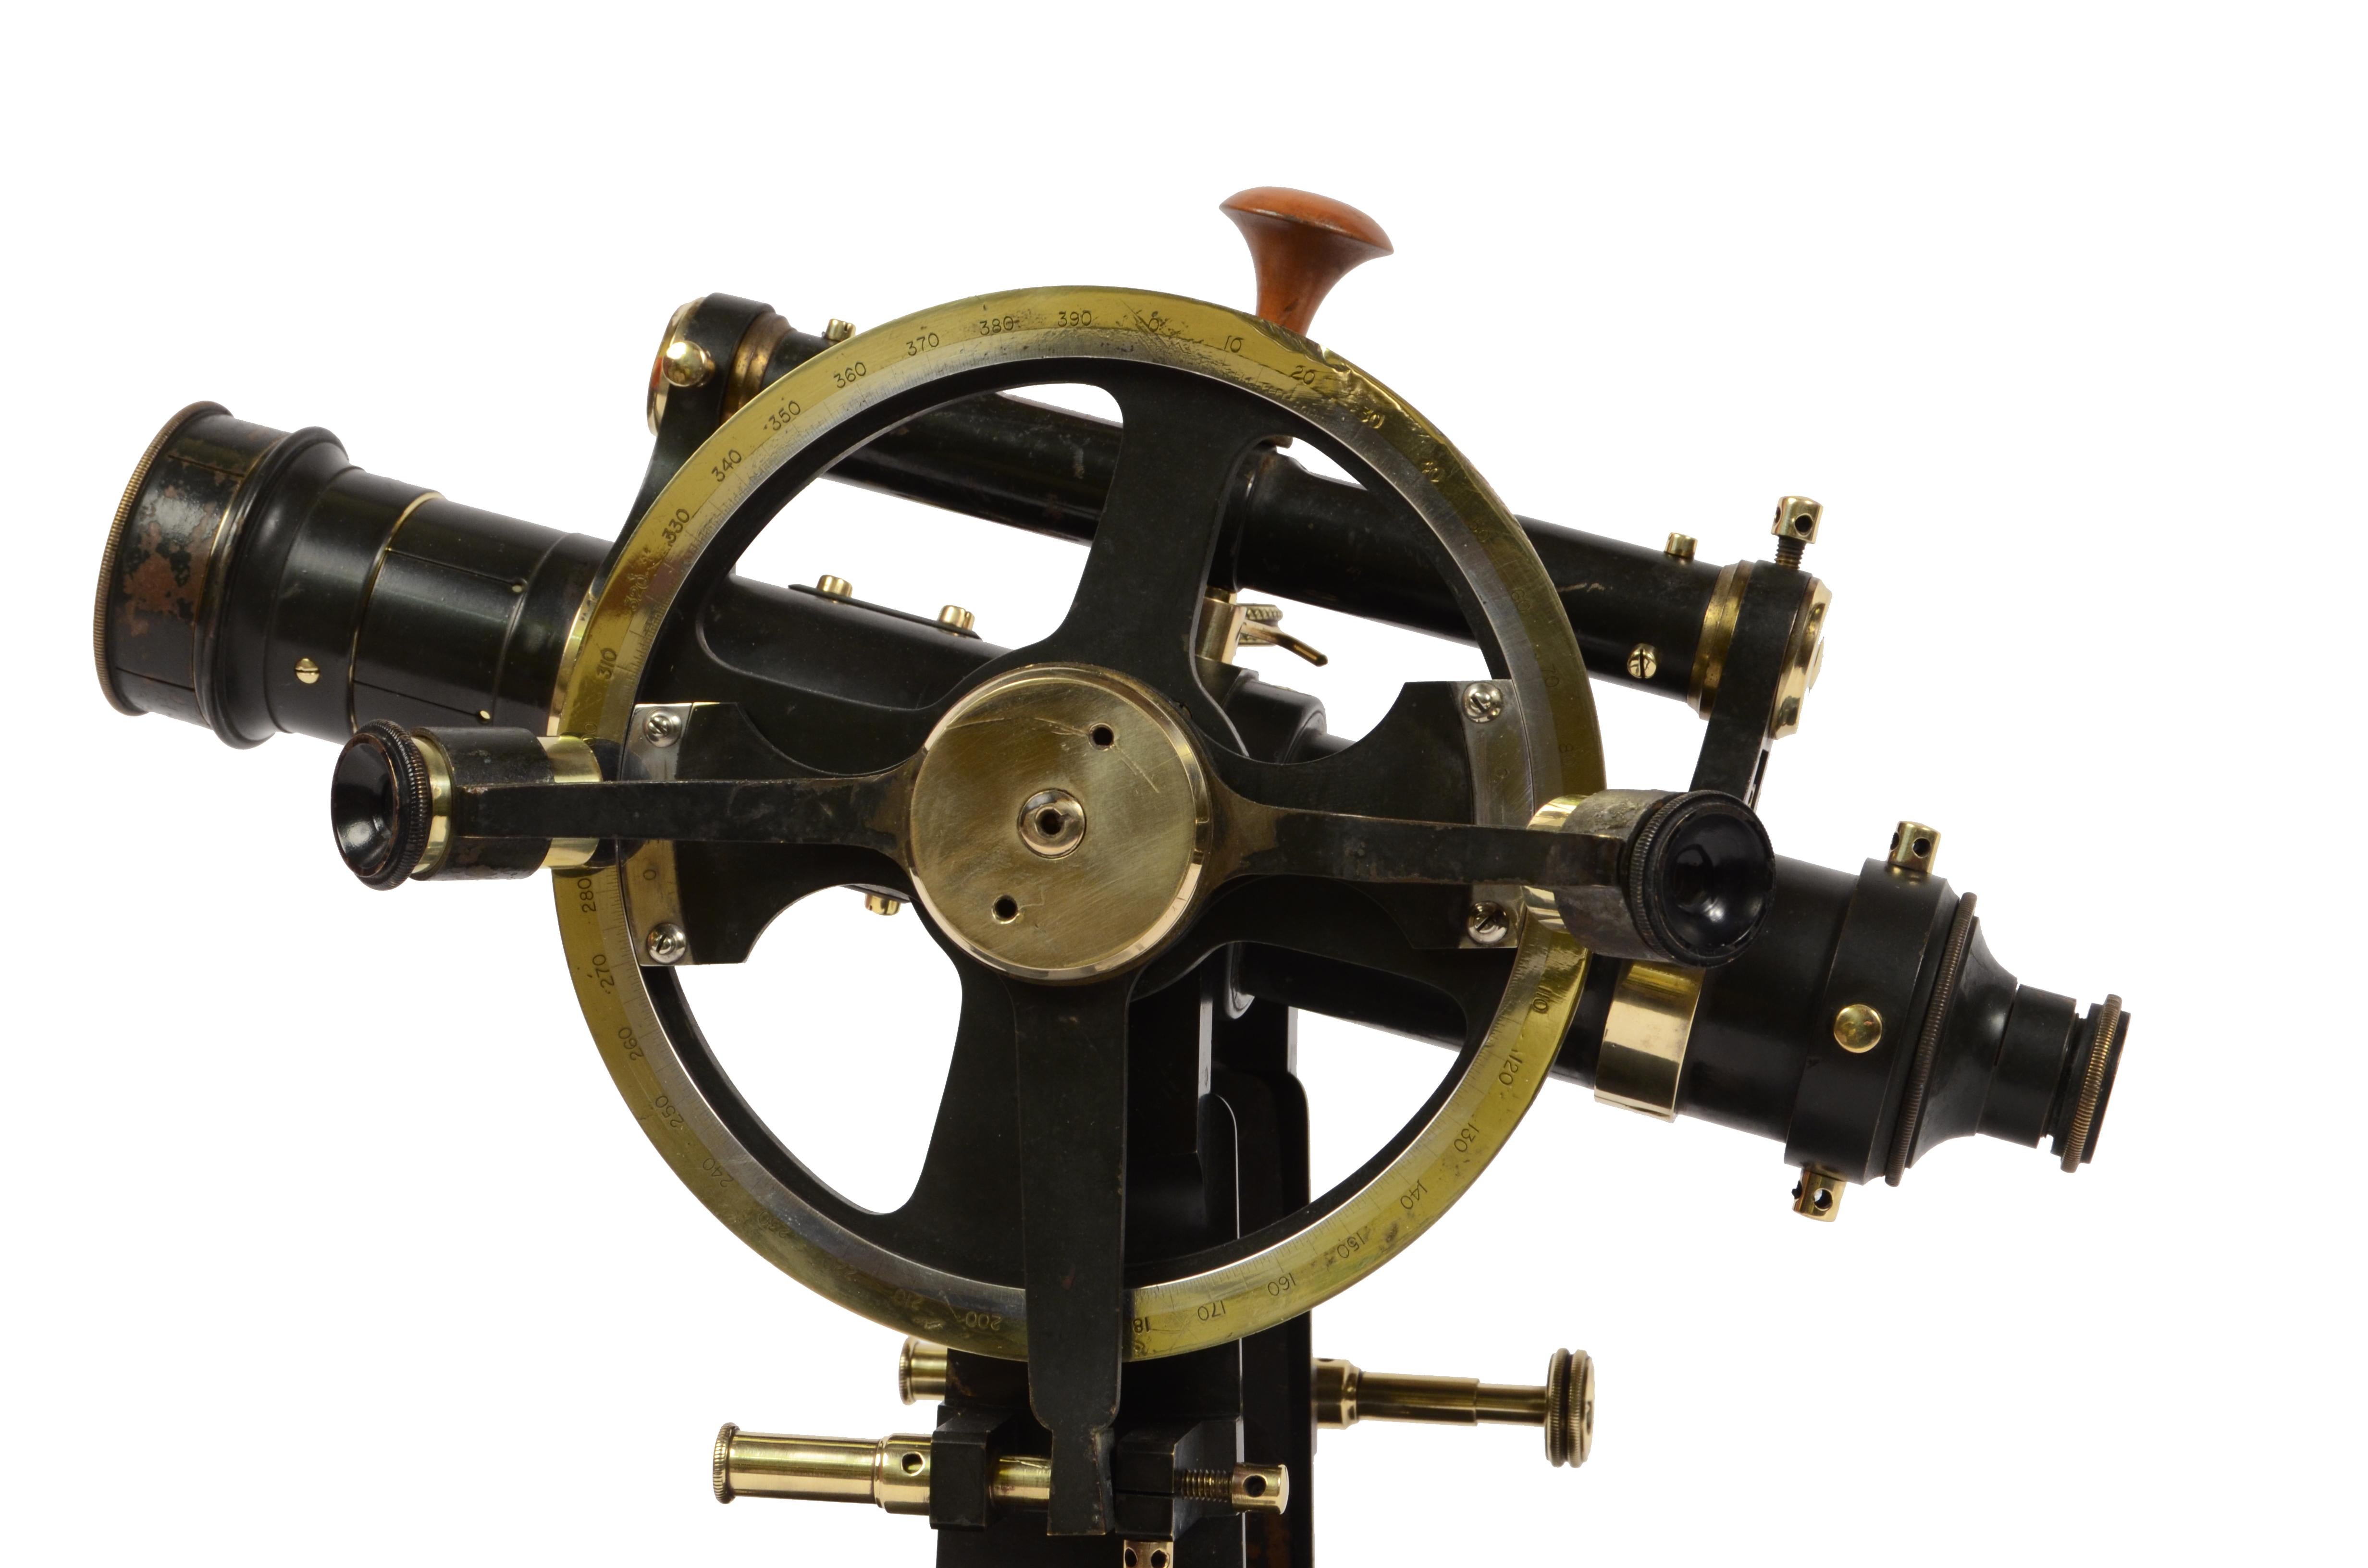 Antique theodolite of burnished brass signed Pietro Sbisà OMS Florence made in the second half of the 19th century.
This instrument was used in terrestrial observations for the measurement of horizontal and vertical angles and also used in the